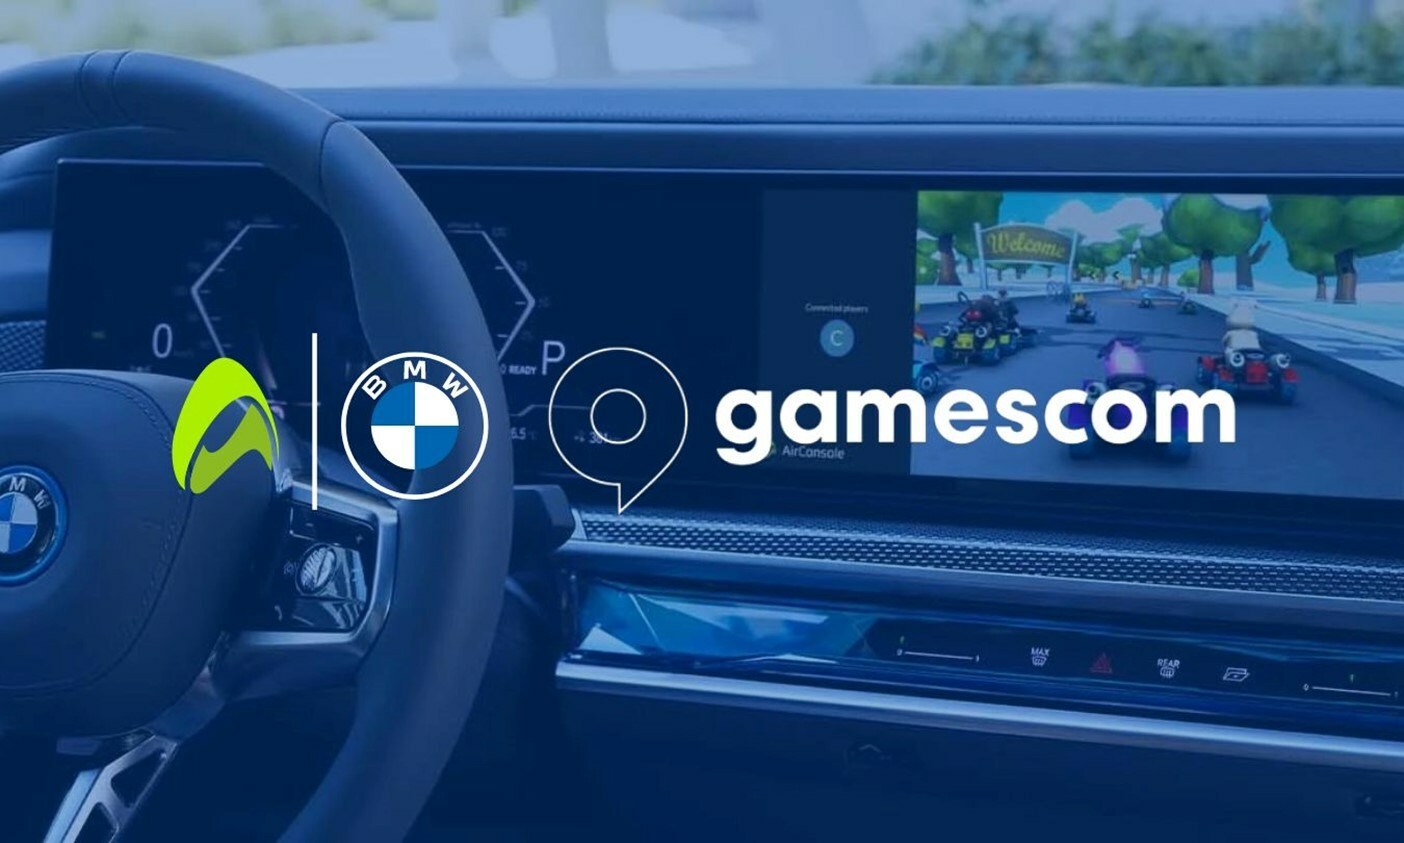 Latest In-Car Gaming Experience Coming to Gamescom | THE SHOP